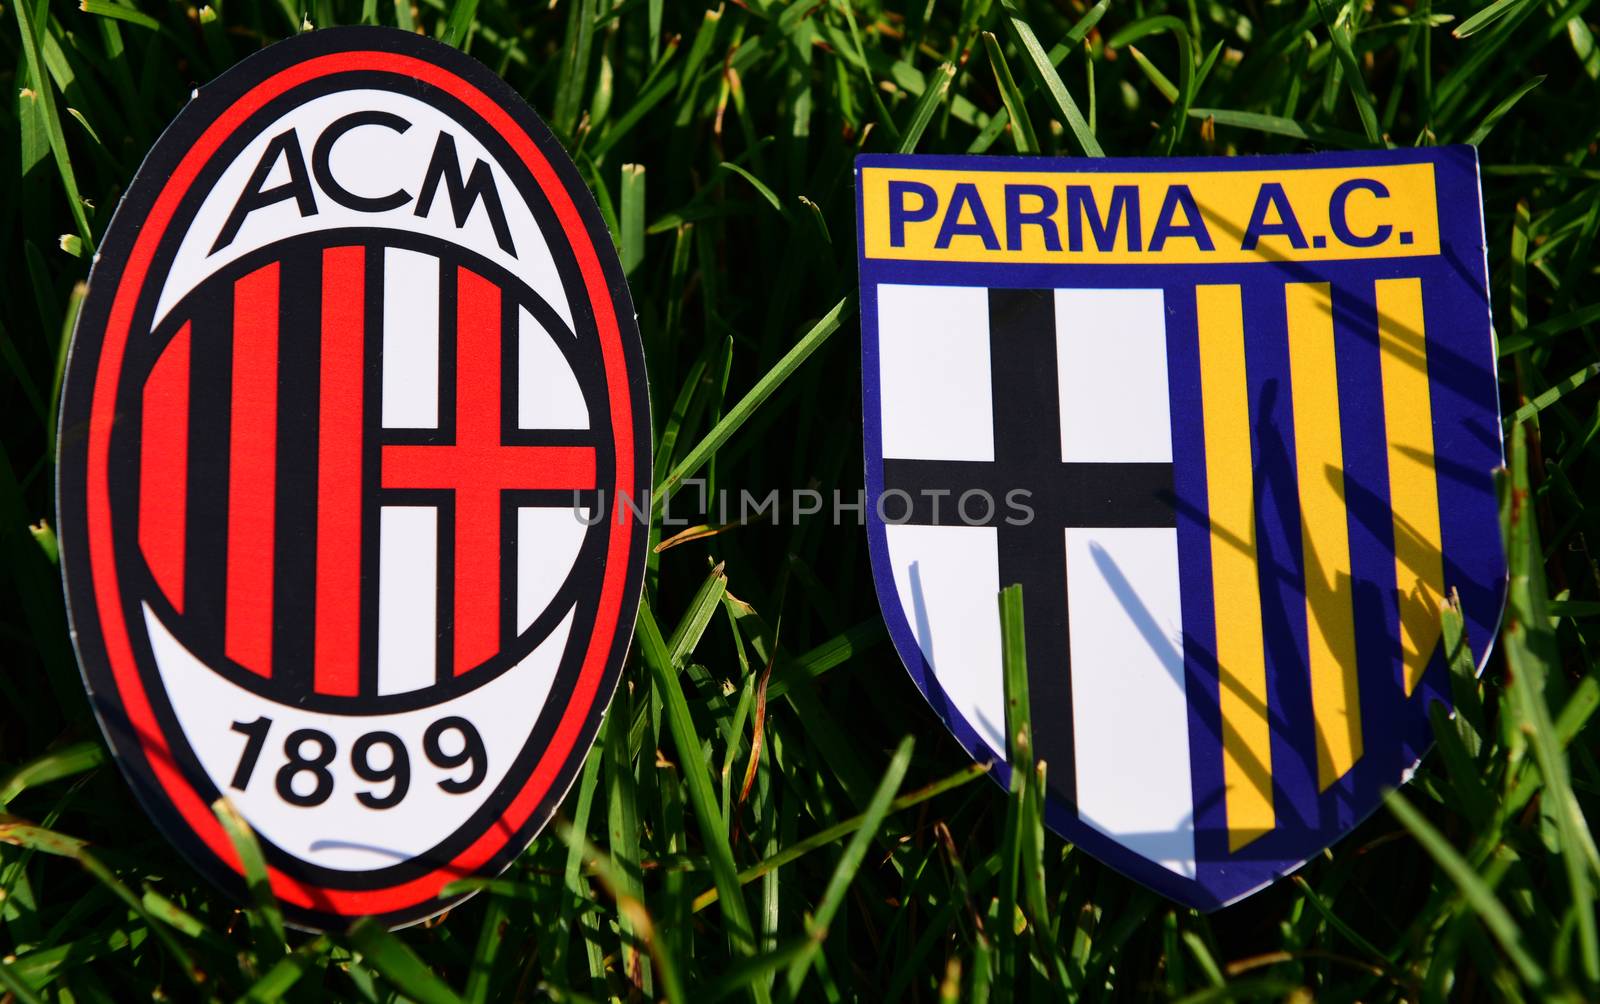 September 6, 2019, Turin, Italy. Emblems of Italian football clubs Milan and Parma on the green grass of the lawn.